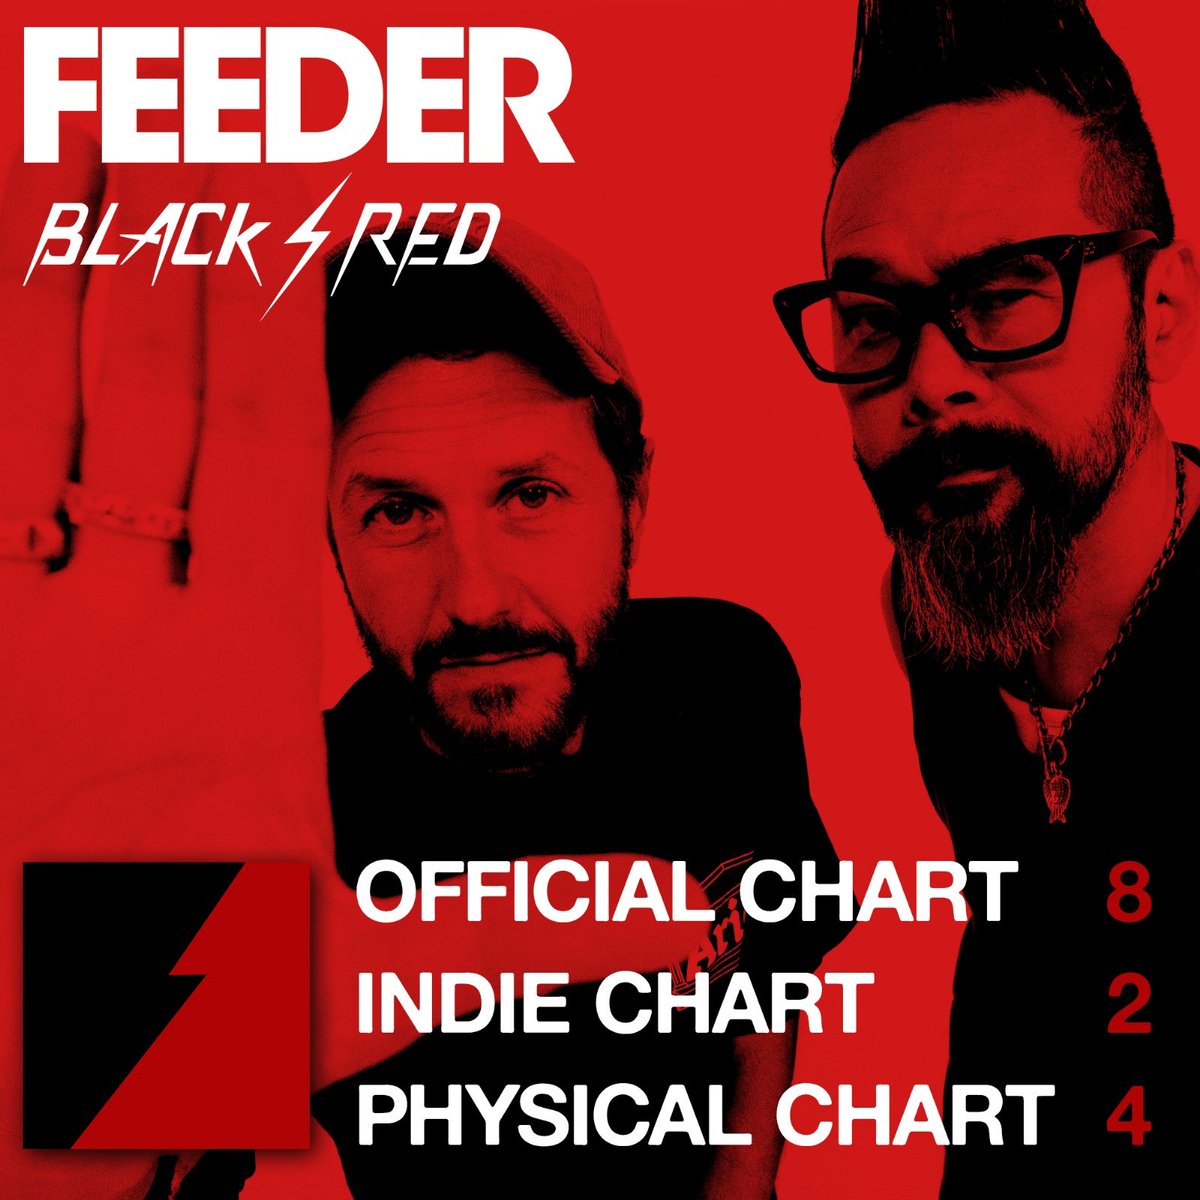 Congratulations to @FeederHQ and their top ten @officialcharts placement for #BlackRed 🎉